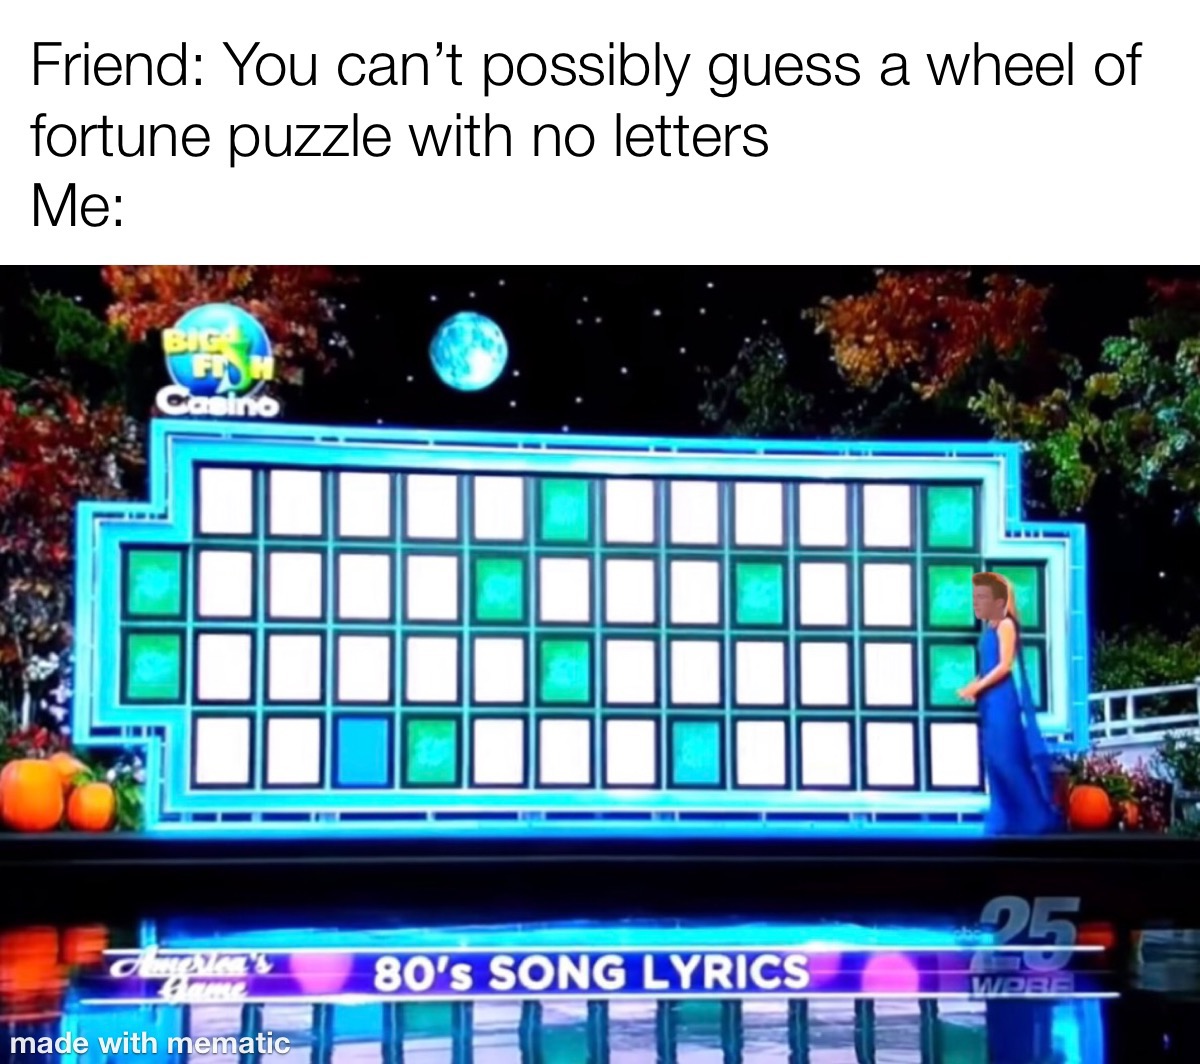 funny dank memes - Friend You can't possibly guess a wheel of fortune puzzle with no letters Me - 80's Song Lyrics